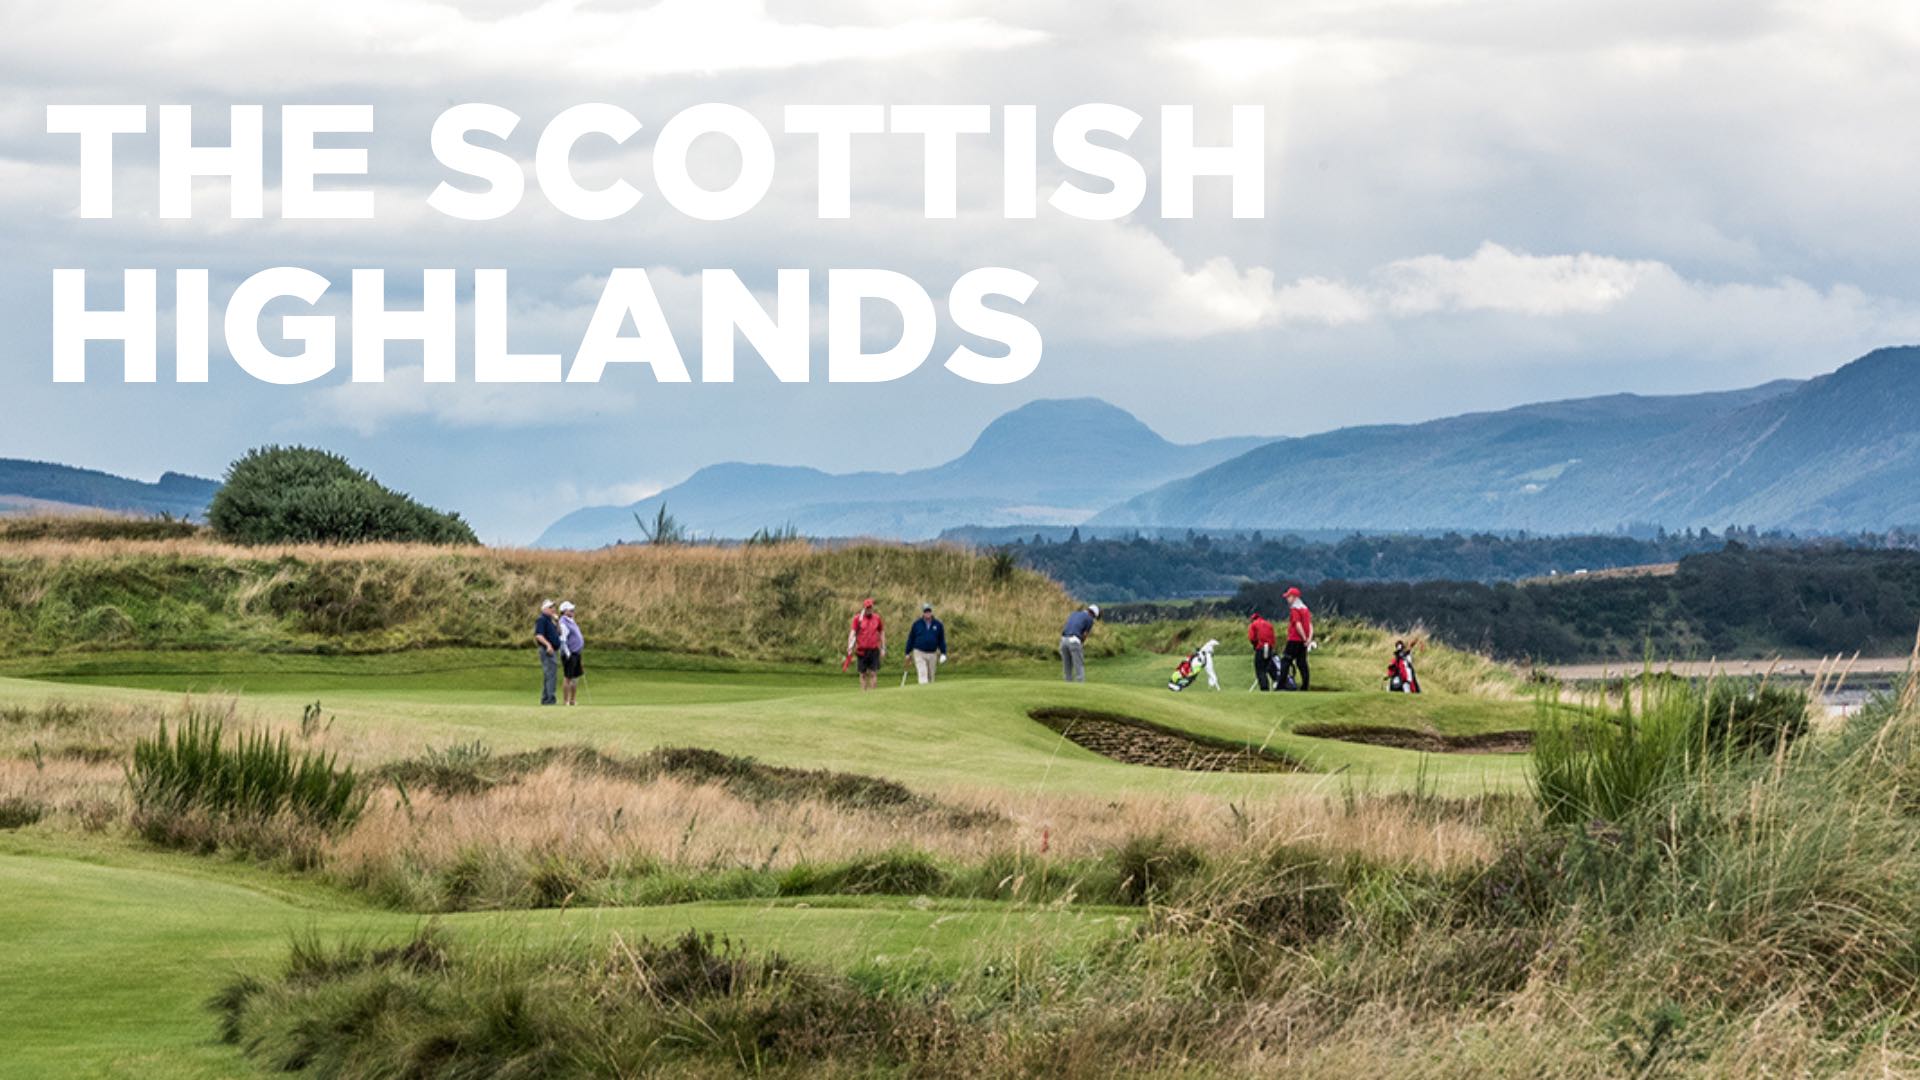 The Scottish Highlands - Golfers playing golf in soctland